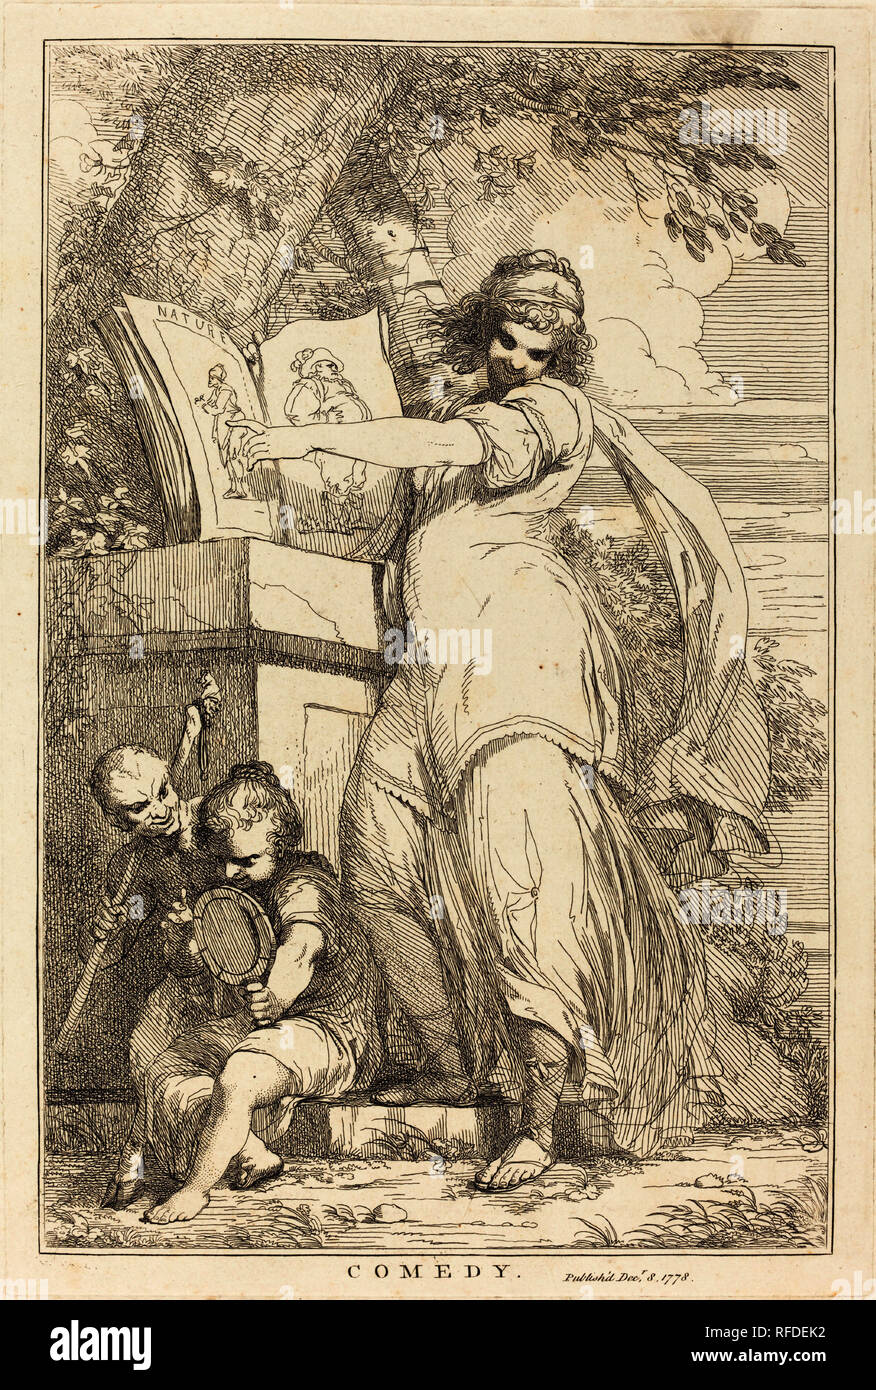 Comedy. Dated: 1778. Dimensions: plate: 30 × 20.1 cm (11 13/16 × 7 15/16 in.)  sheet: 42.4 × 29.1 cm (16 11/16 × 11 7/16 in.). Medium: etching. Museum: National Gallery of Art, Washington DC. Author: John Hamilton Mortimer. Stock Photo